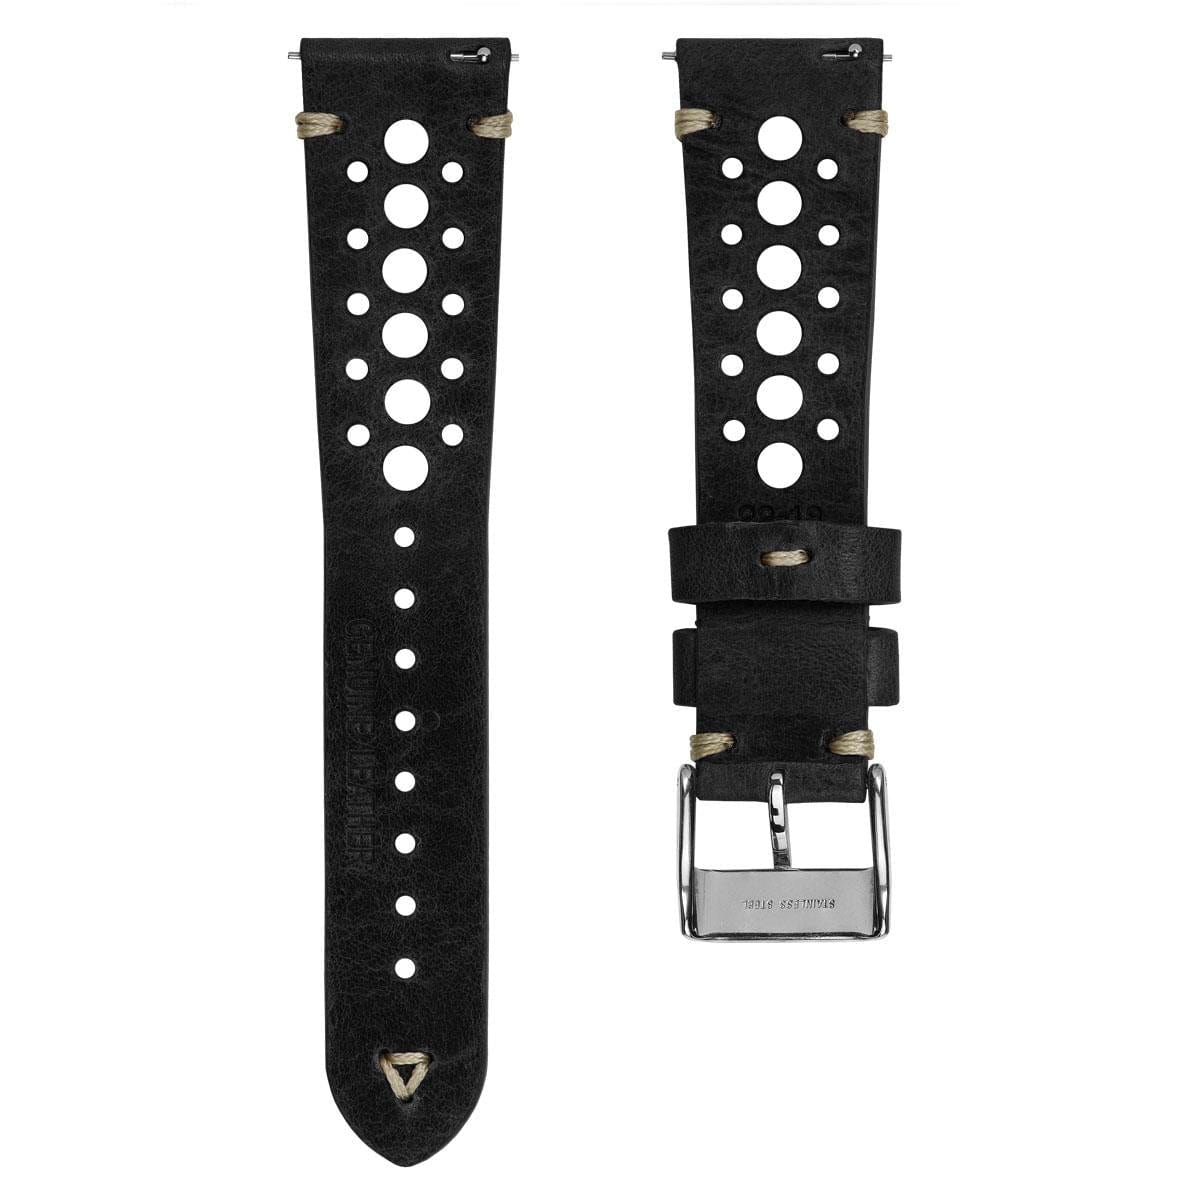 Simple Handmade Italian Leather Perforated Watch Strap - Black